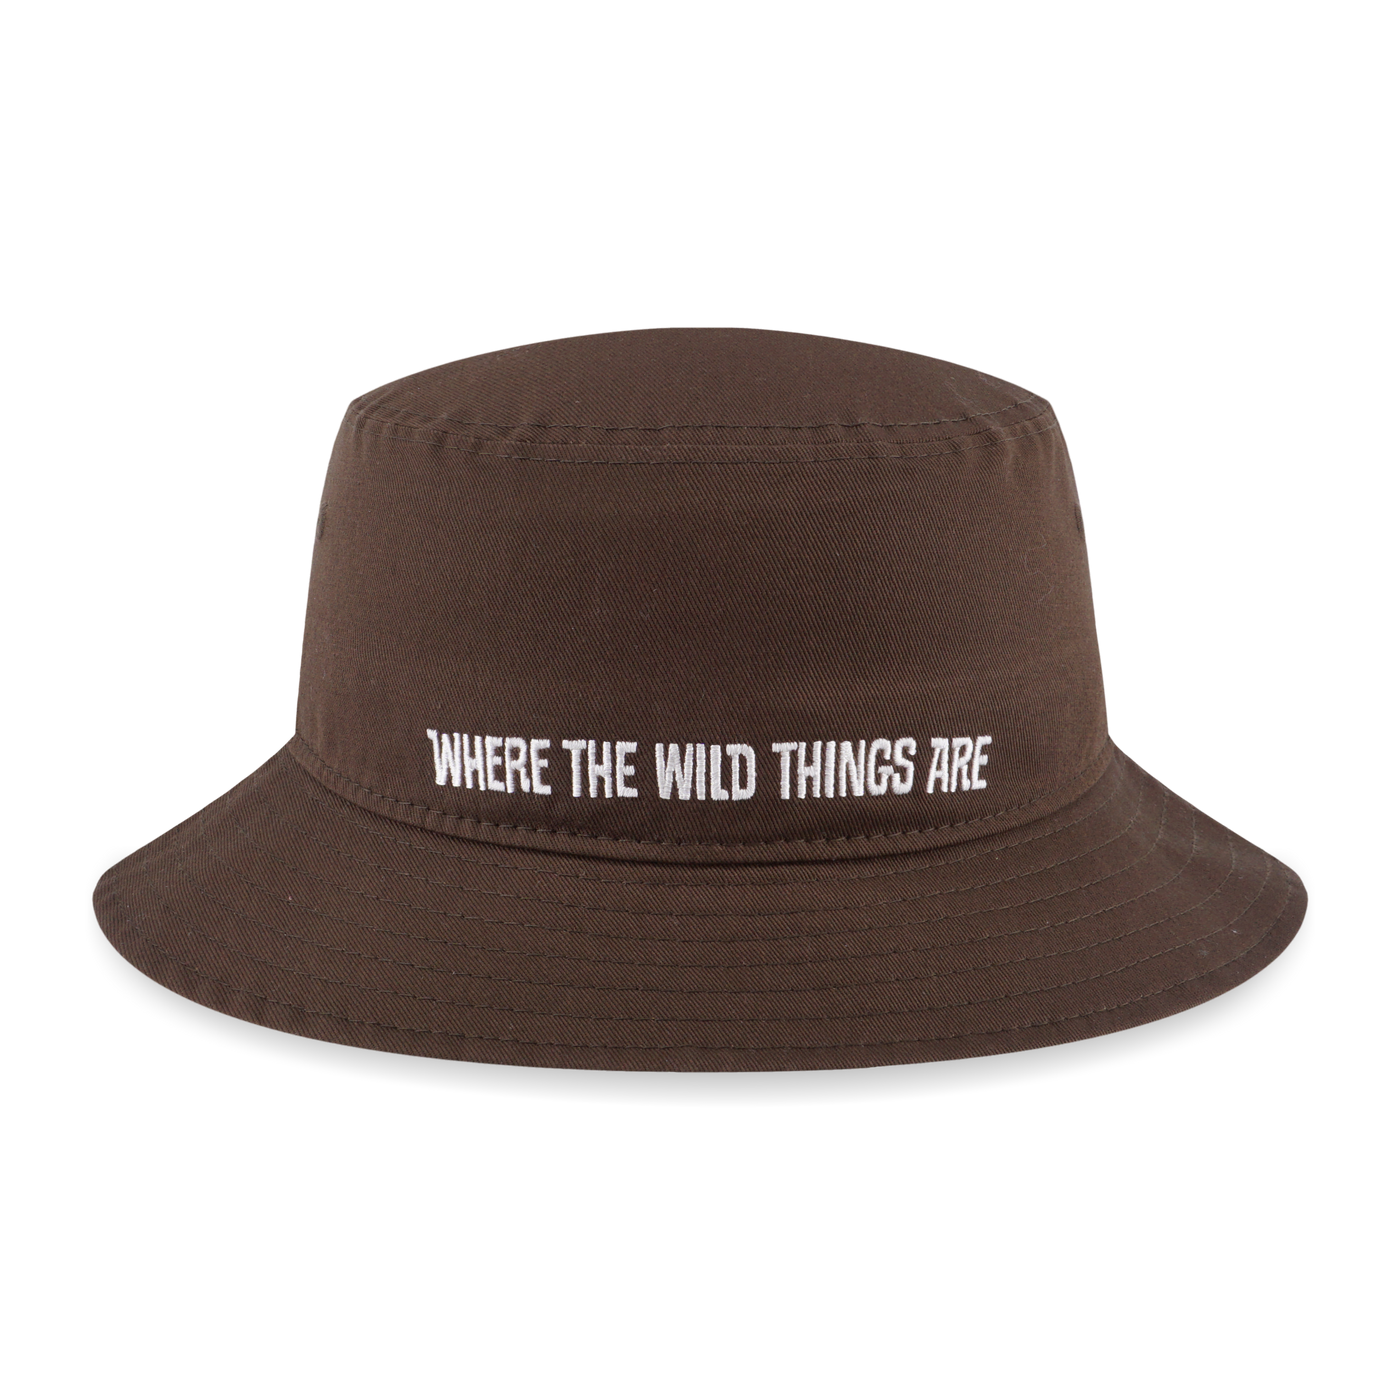 WHERE THE WILD THINGS ARE WHERE THE WILD THINGS ARE DARK BROWN BUCKET